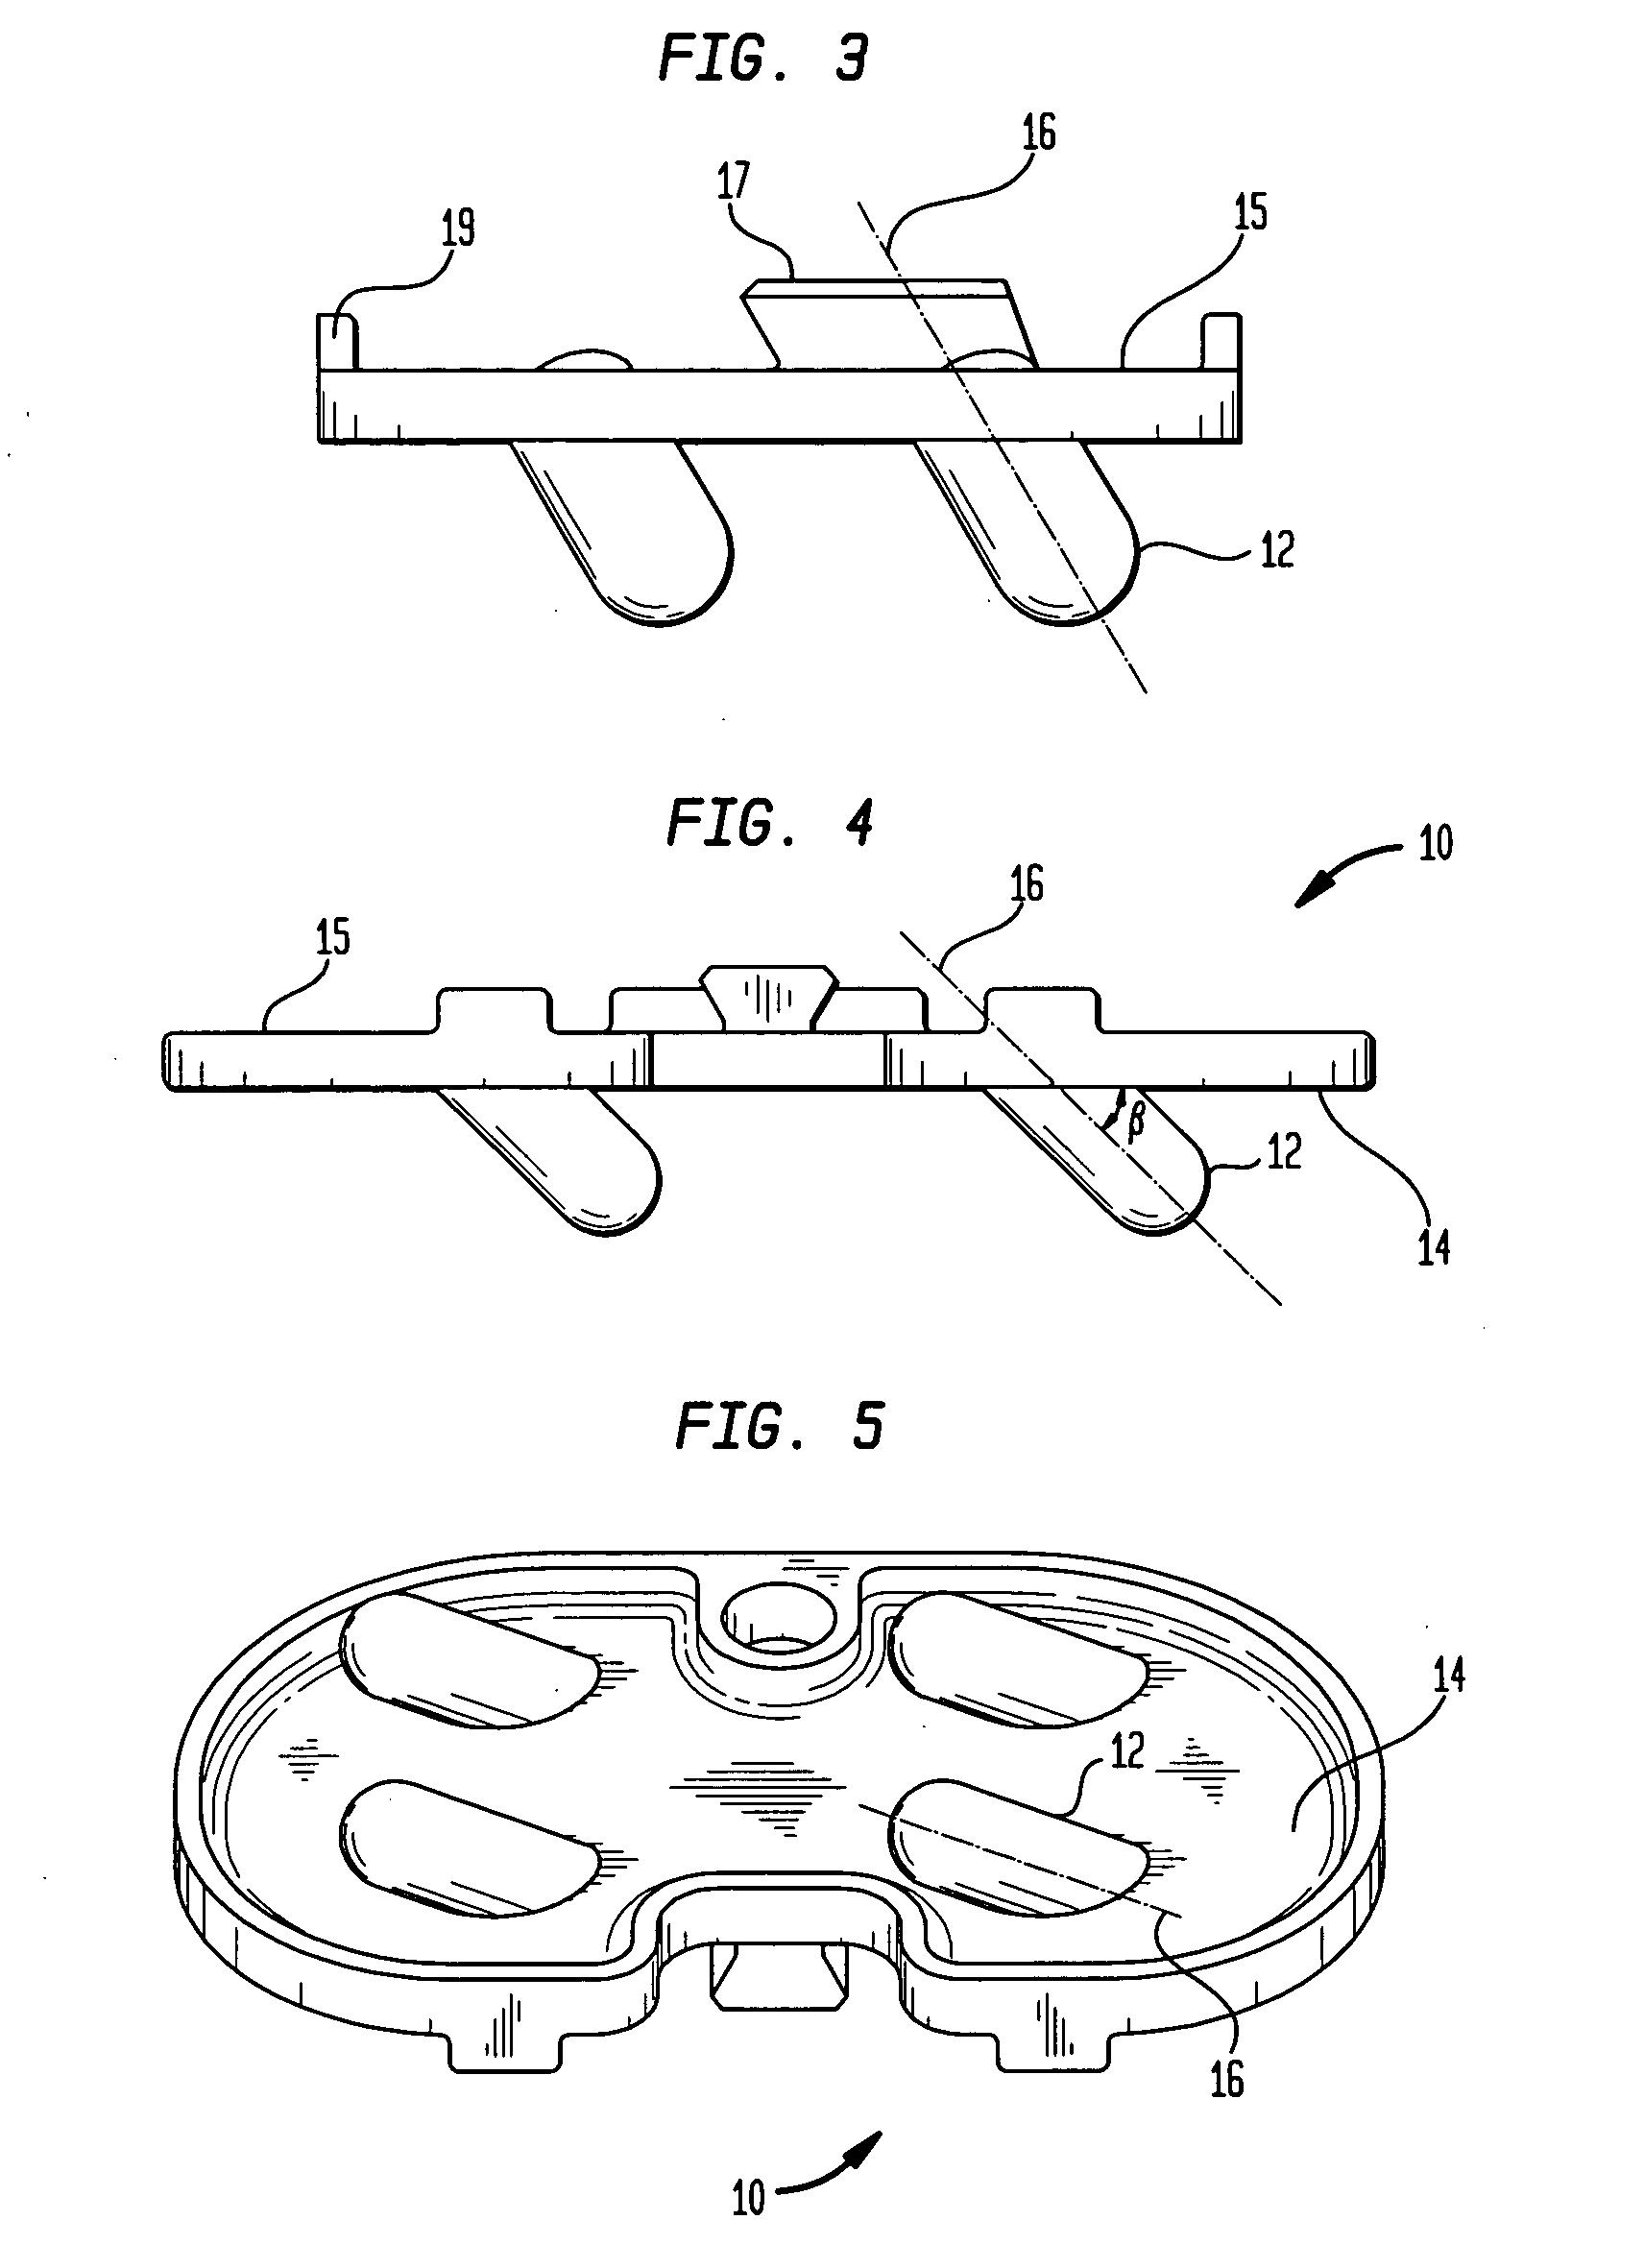 Orthopedic implant with angled pegs